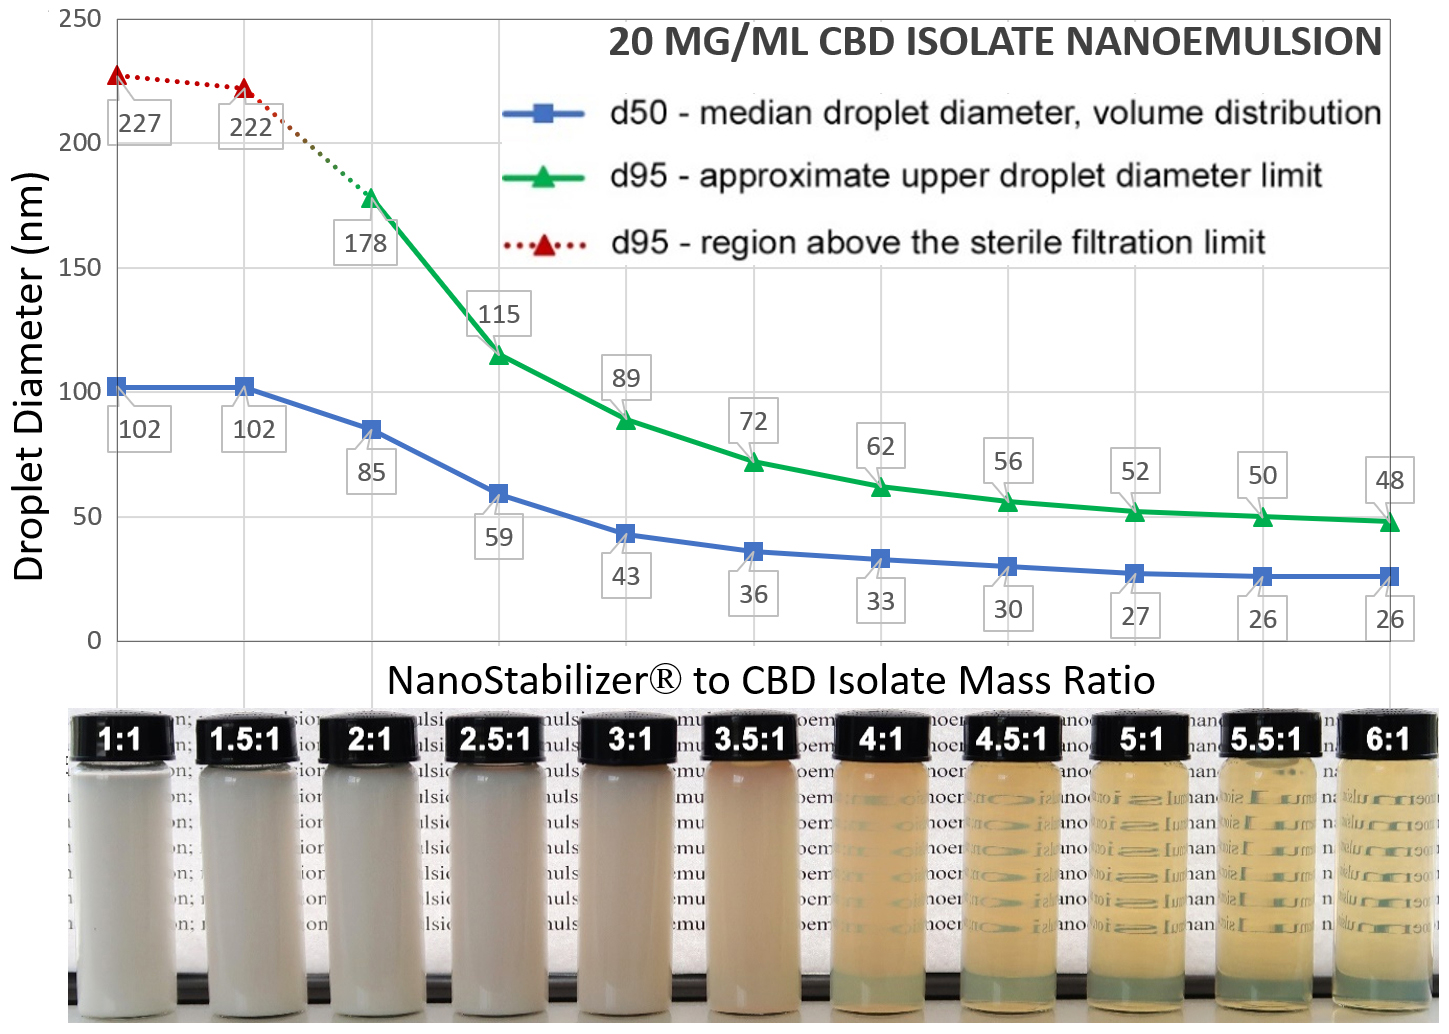 Droplet sizes and translucency versus NanoStabilizer to CBD isolate ratio